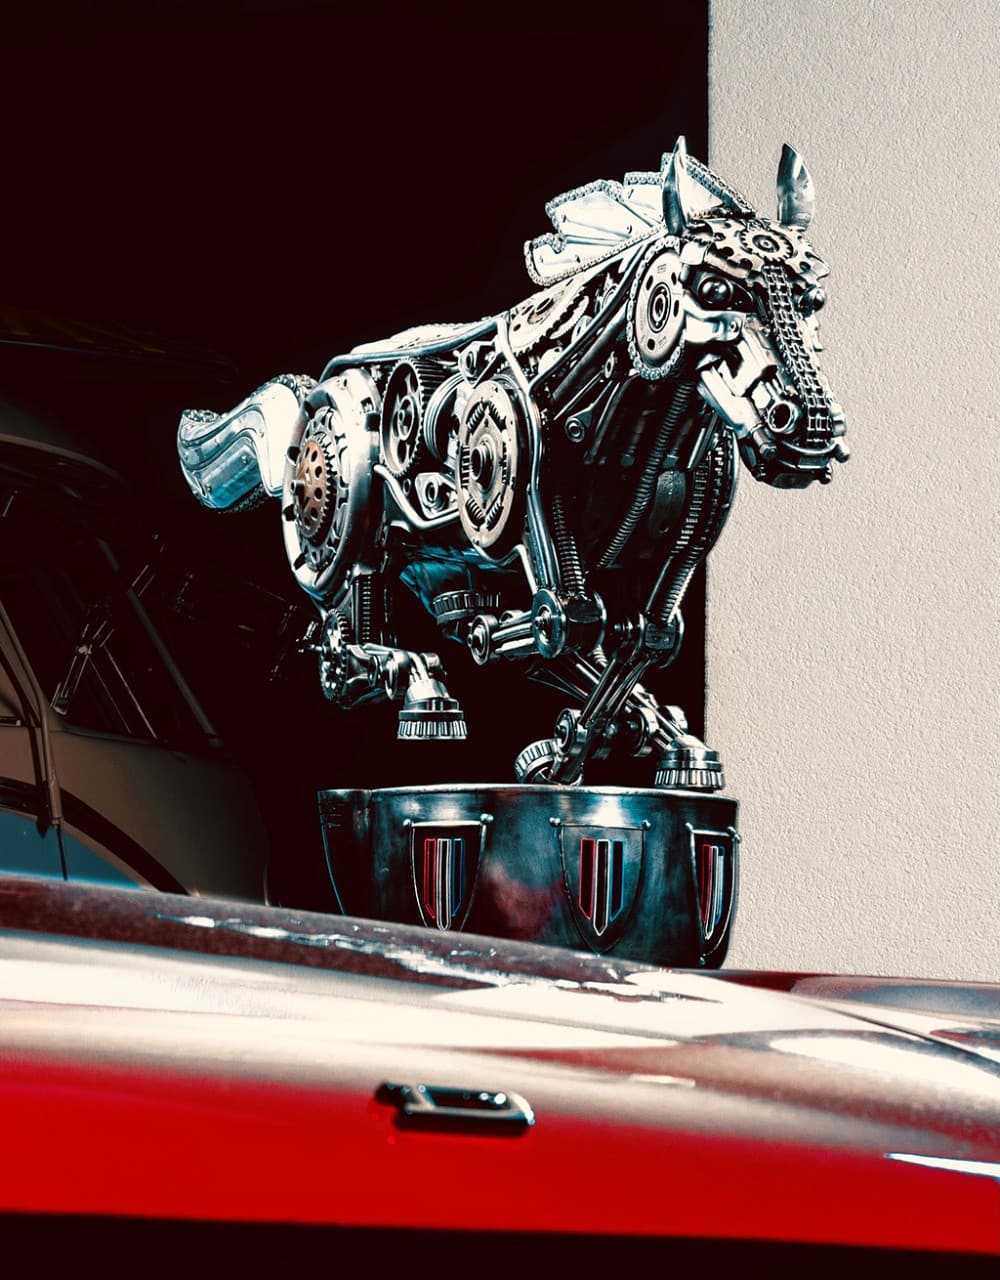 The Fascinating Story Behind this Stunning Mustang Sculpture 